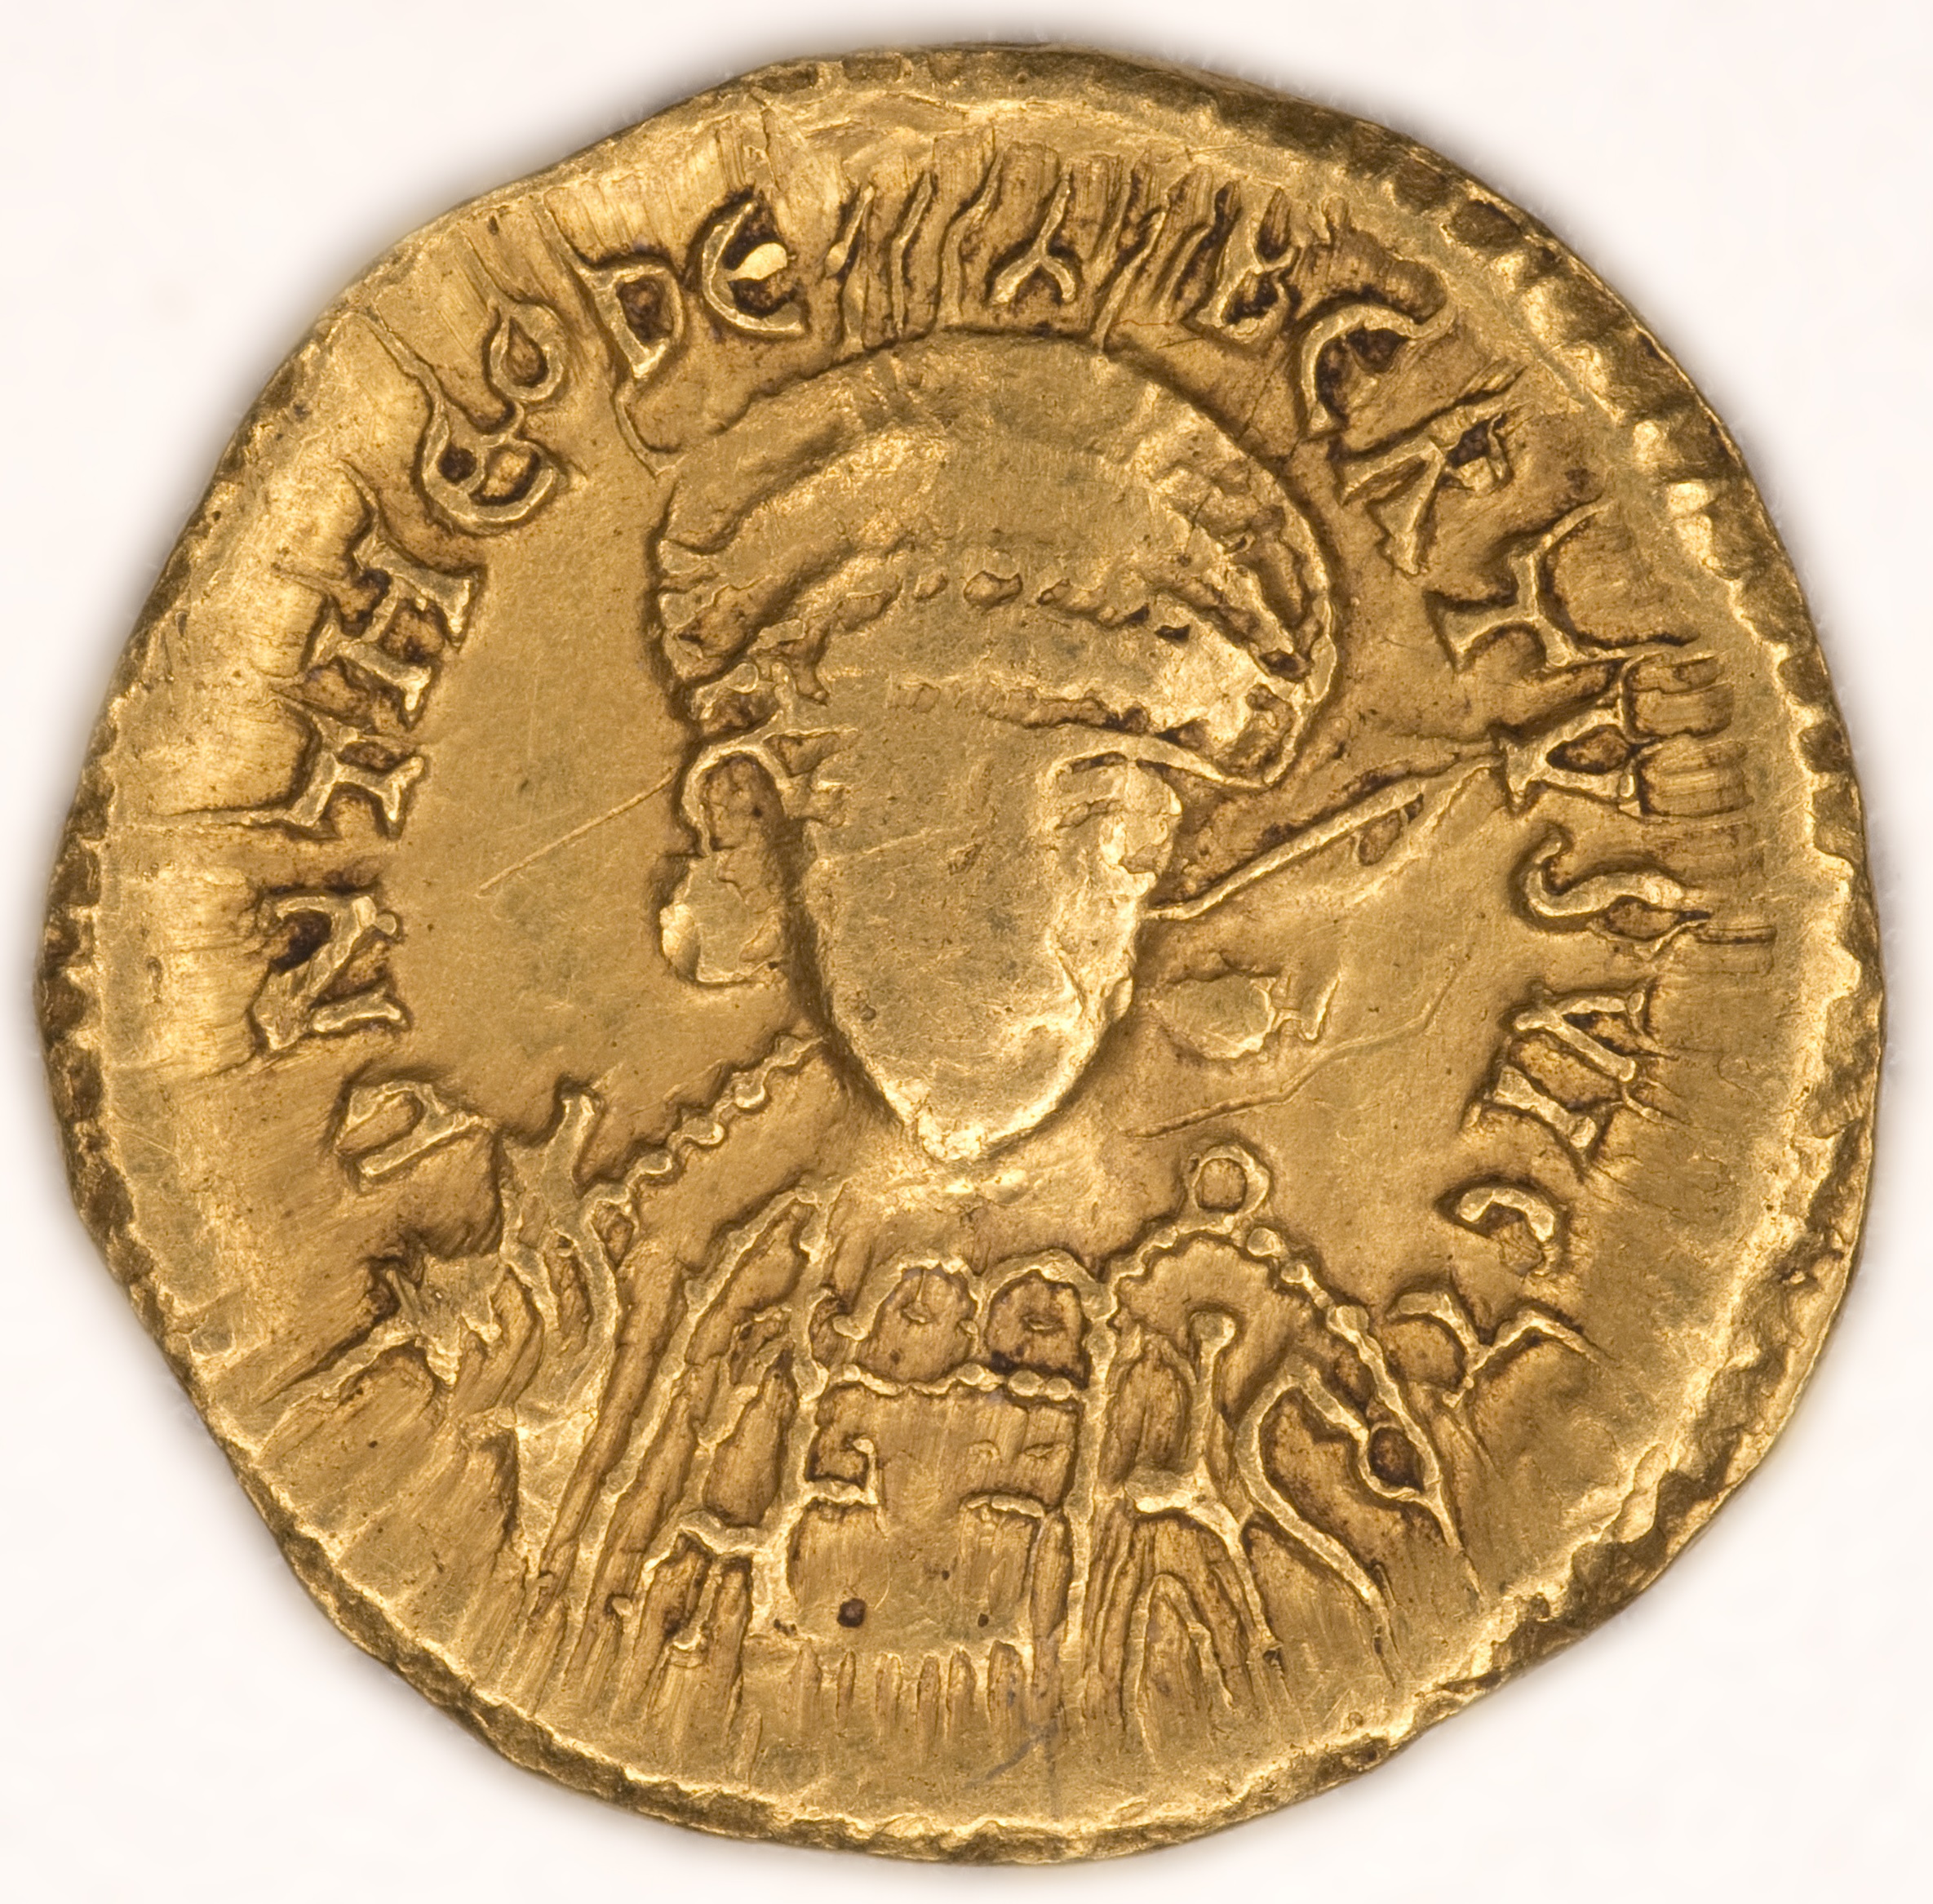 The History Blog » Blog Archive » Early medieval gold coin hoard found in Netherlands